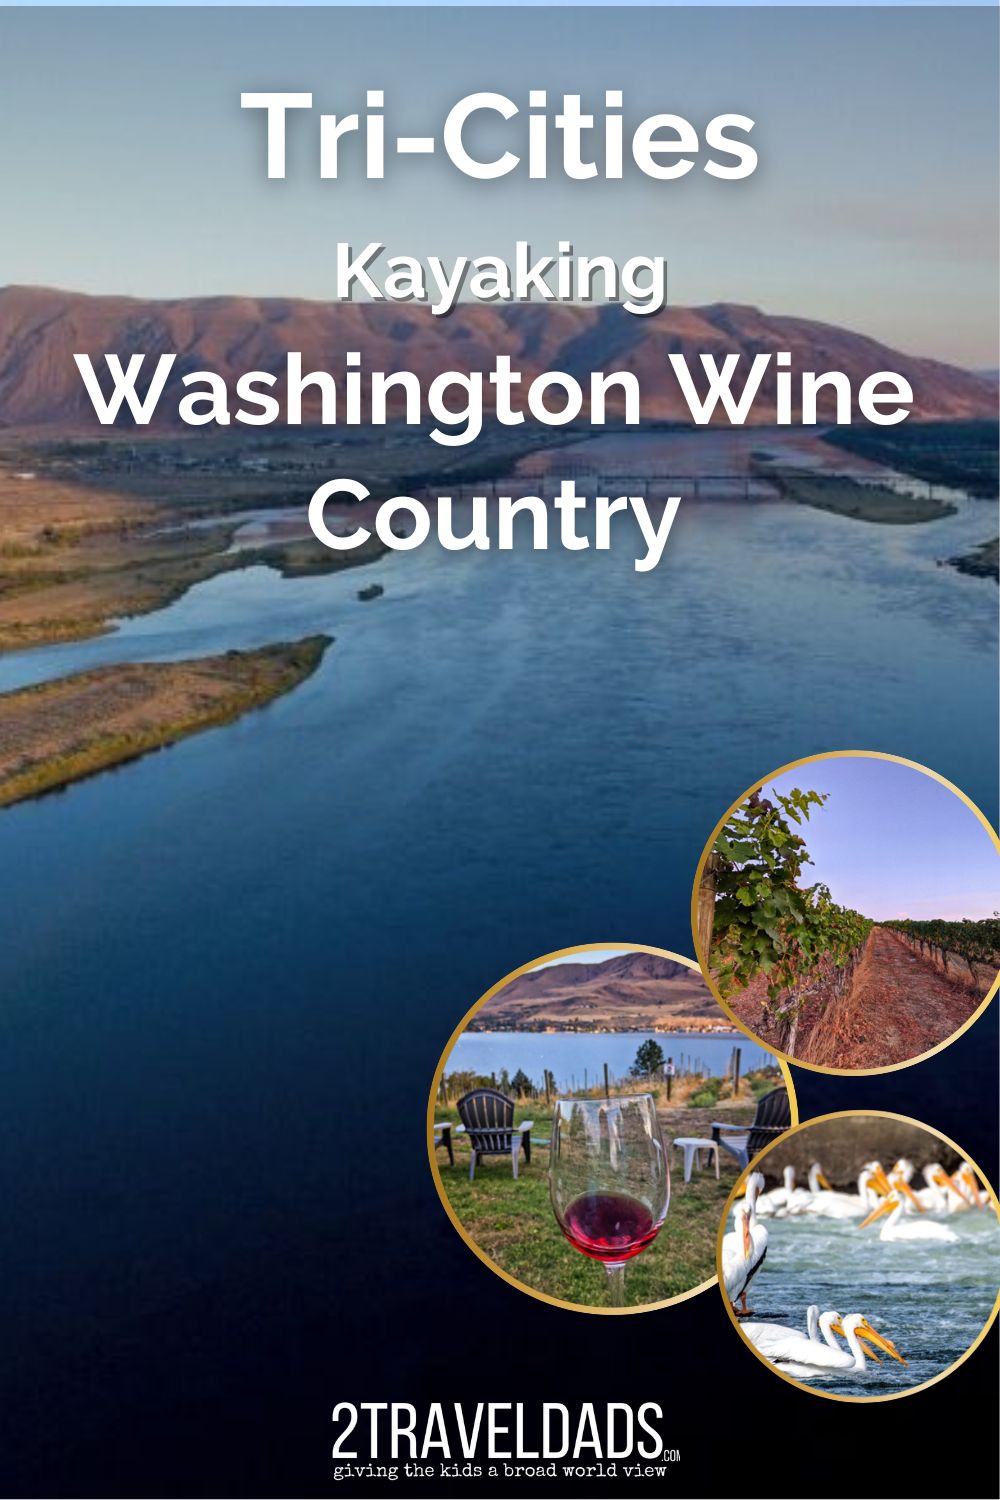 Kayaking in the Tri Cities of Washington's wine country is a mix of epic cliffs and rolling farm country. Top spots to kayak on the Columbia and Snake Rivers in Kennewick, Pasco and Richland, Washington.